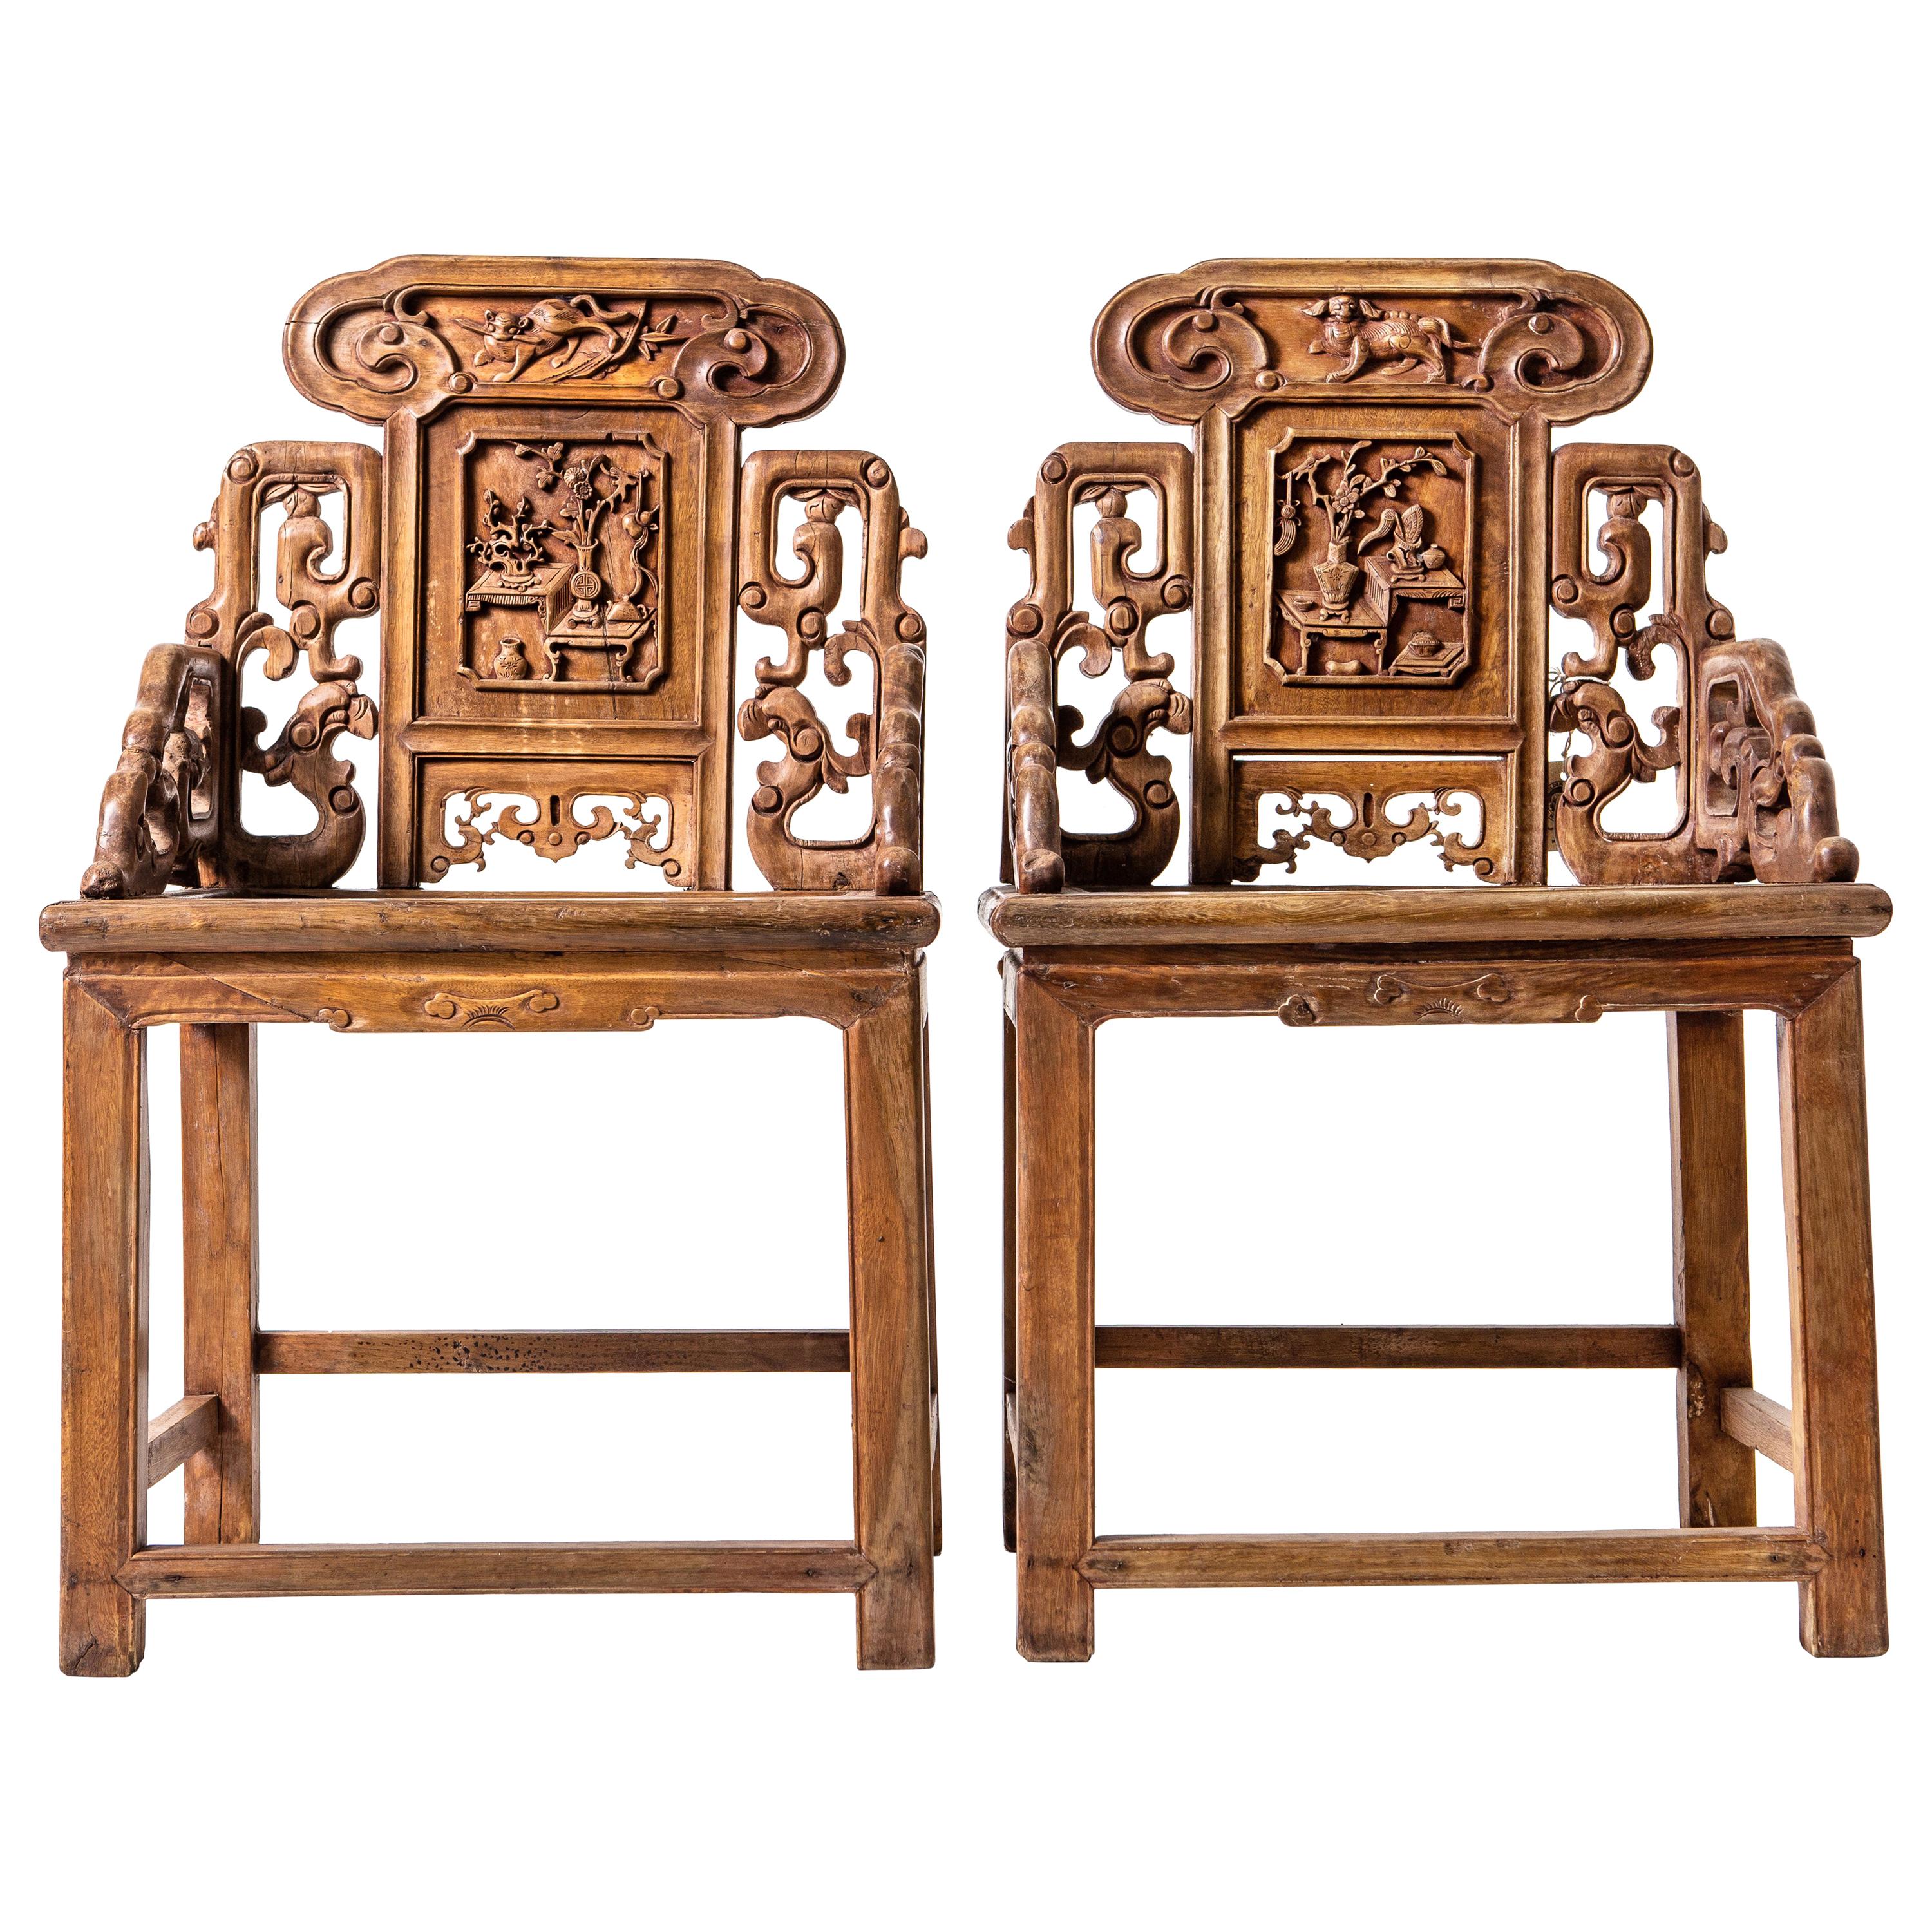 Pair of Qing Dynasty "Dragon and Cloud" Motif Armchairs